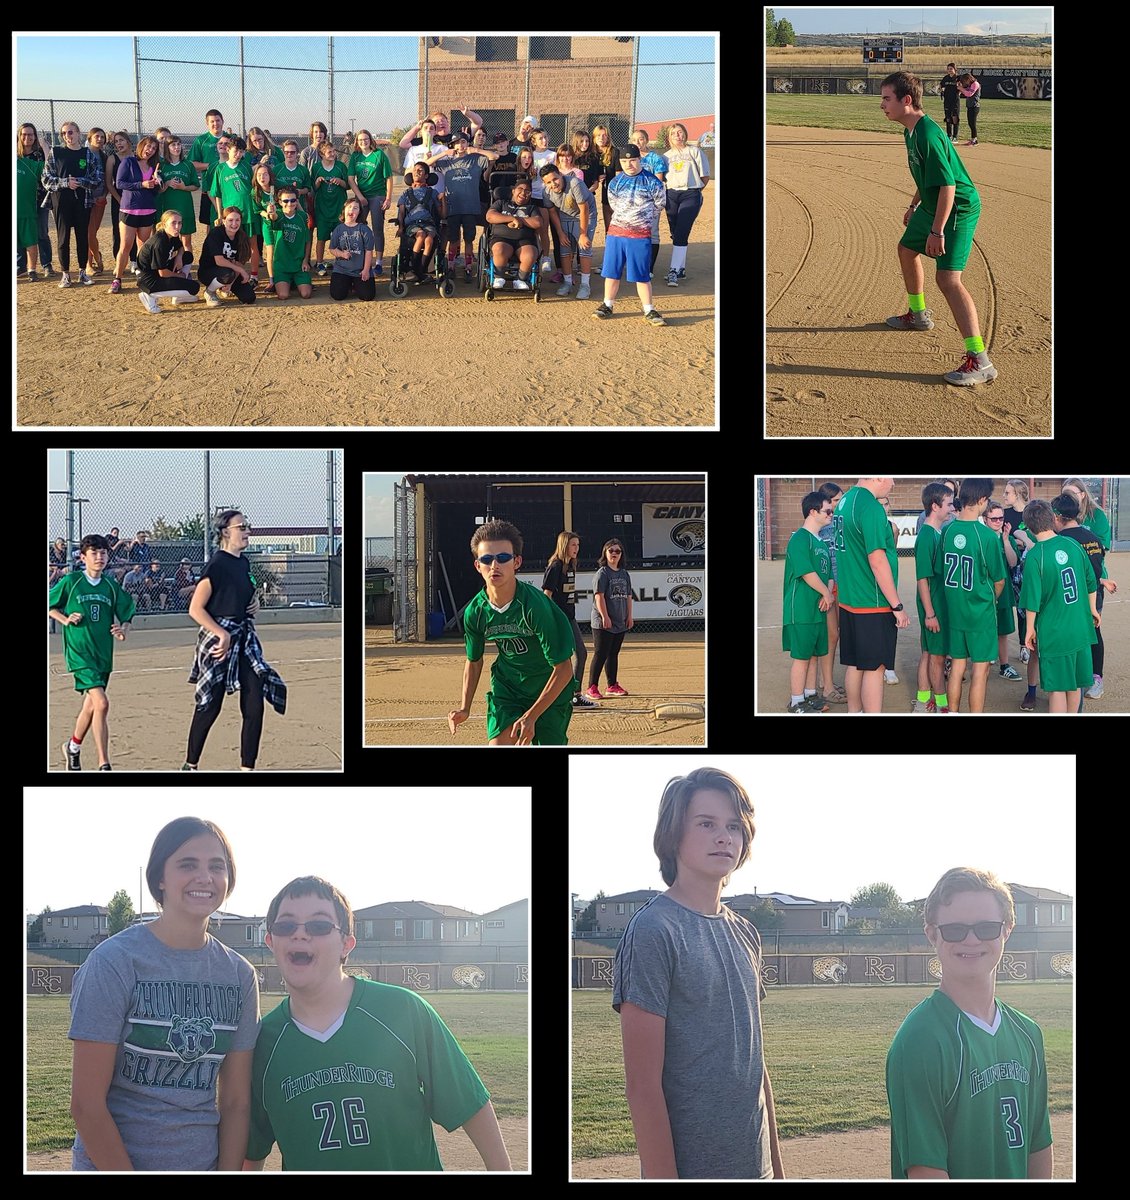 What a fun day of 'Kickball' at Canyon against @TRHSGrizzlies and a Huge S/O  @SoftballRCHS with their help for allowing us to use their field, supporting both teams with popsicle!!!  #JagLove  #JagNation #WeRJustLikeU #ChooseToIncluded
#DontDisMyAbility @SpecOlympicsCO